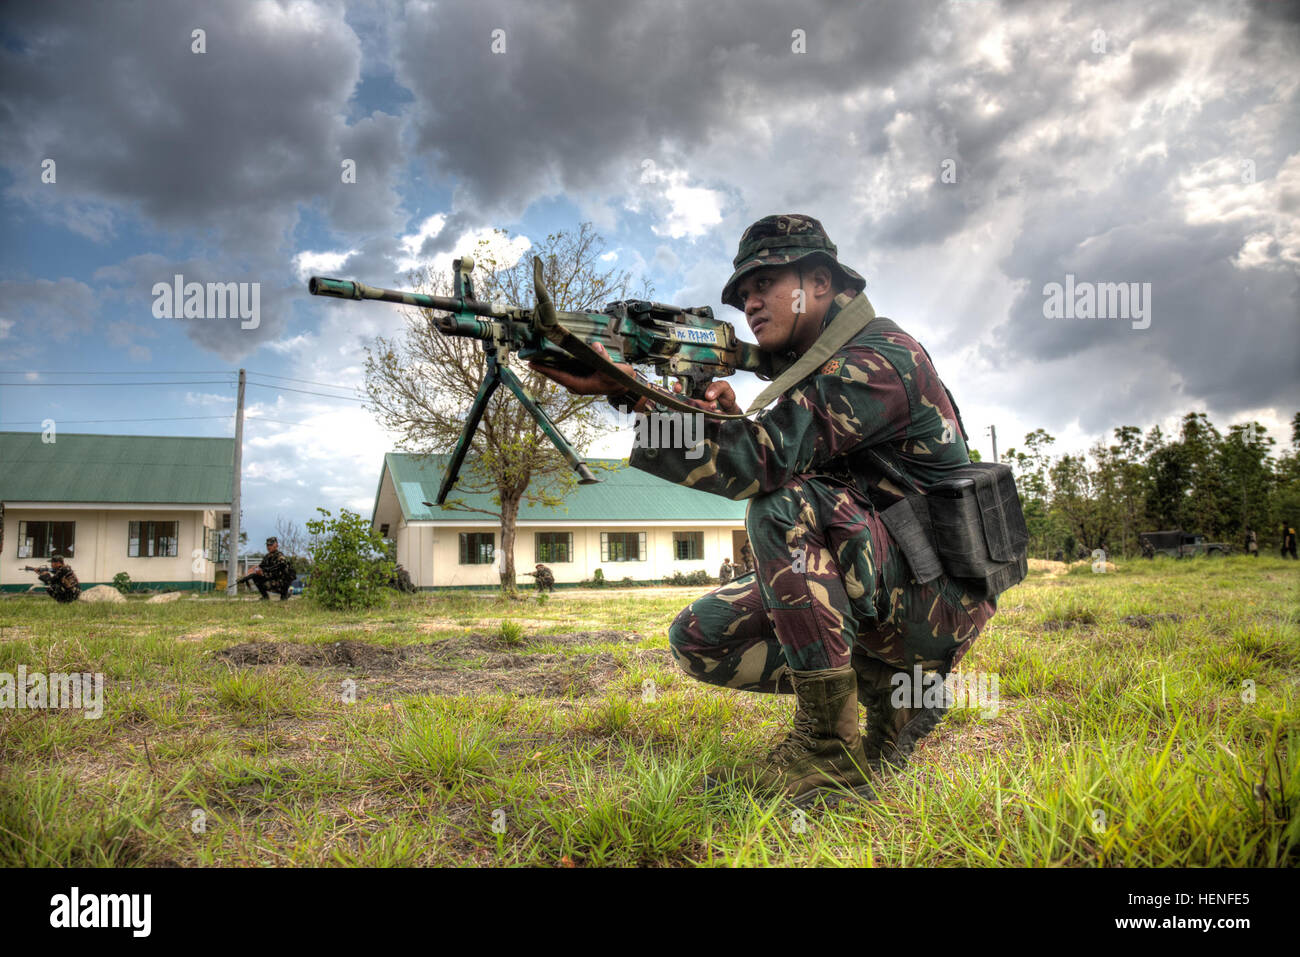 Philippine Army soldier Pfc. Perante, 20th Infantry Battalion, Philippine Army, how to identify an improvised explosive device during exercise Balikatan 2014 on Fort Magsaysay, Philippines, May 01, 2014. The Soldiers are trained to form a three-hundred sixty degree perimeter away from an unexploded ordnance. This year marks the 30th iteration of the exercise, which is an annual Republic of the Philippines-U.S. military bilateral training exercise and humanitarian civic assistance engagement.  (U.S. Army Photo by Spc. Michael G. Herrero) Balikatan 2014 140501-A-IR245-119 Stock Photo